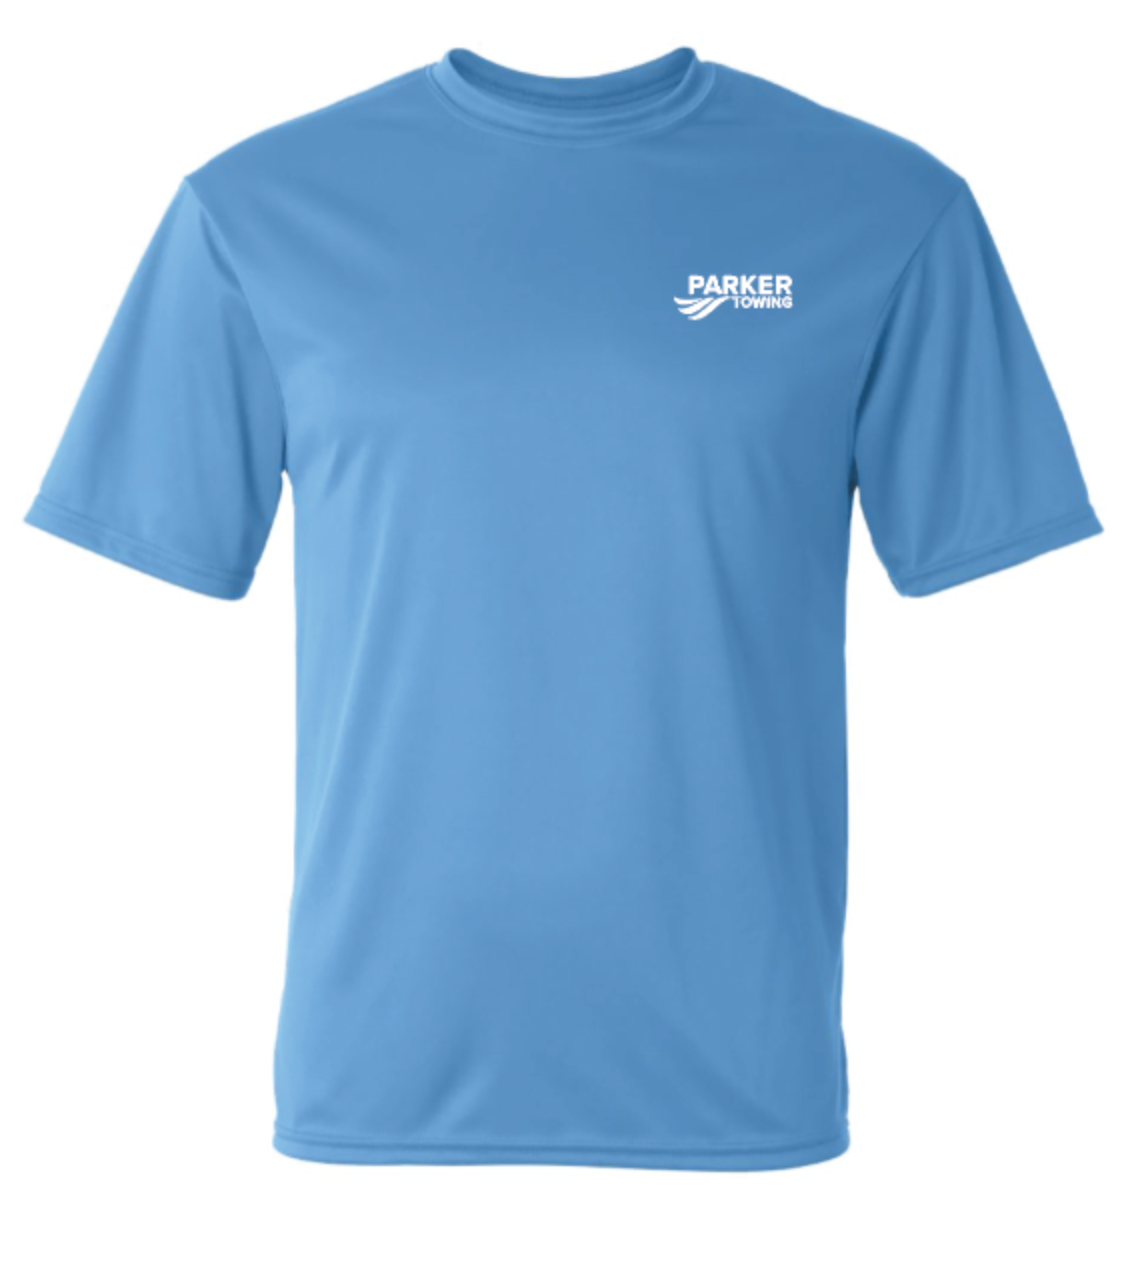 PARKER TOWING DRI-FIT SHORT SLEEVE TEE